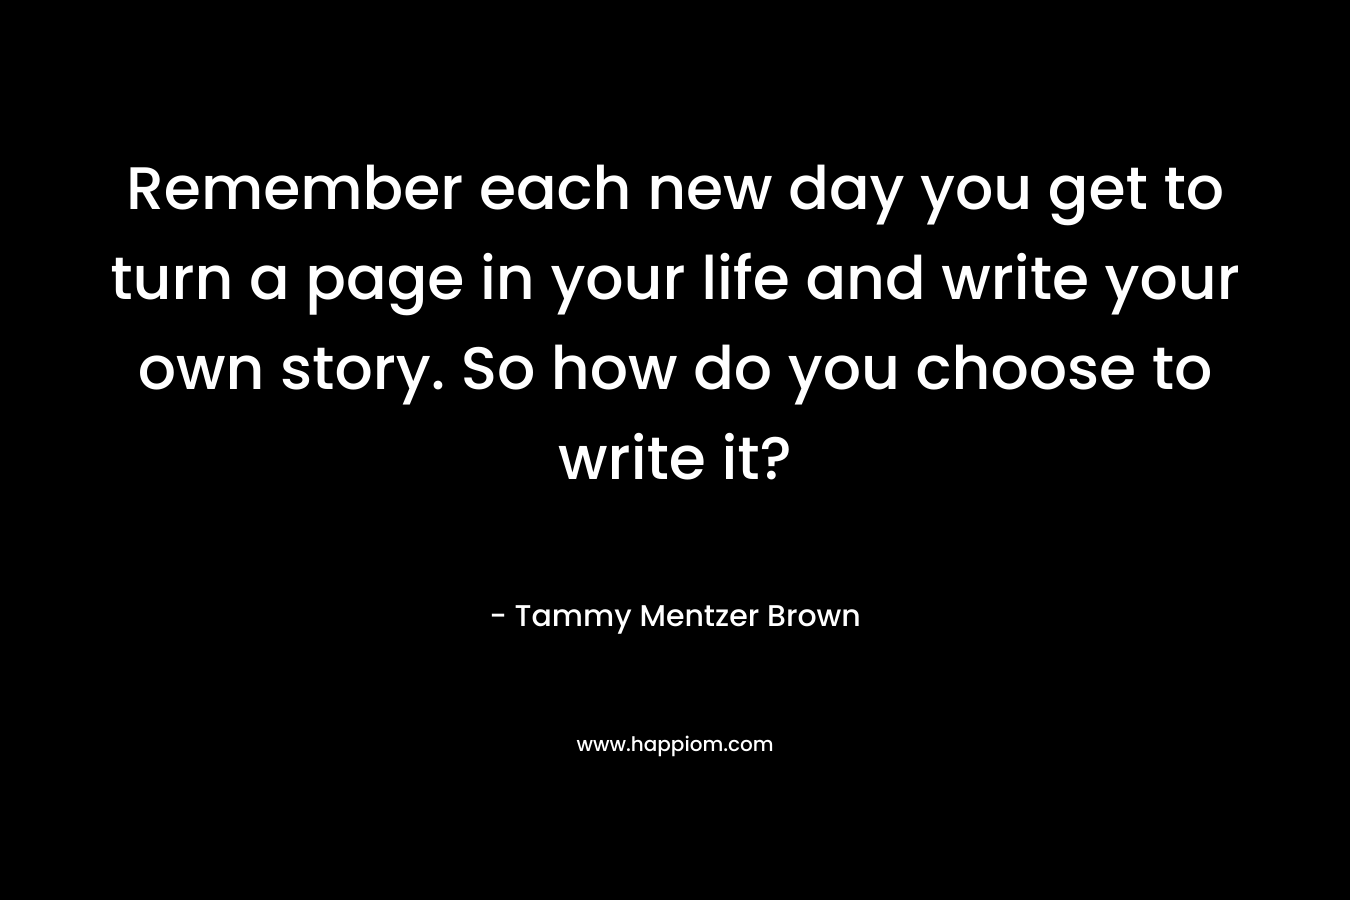 Remember each new day you get to turn a page in your life and write your own story. So how do you choose to write it? – Tammy Mentzer Brown